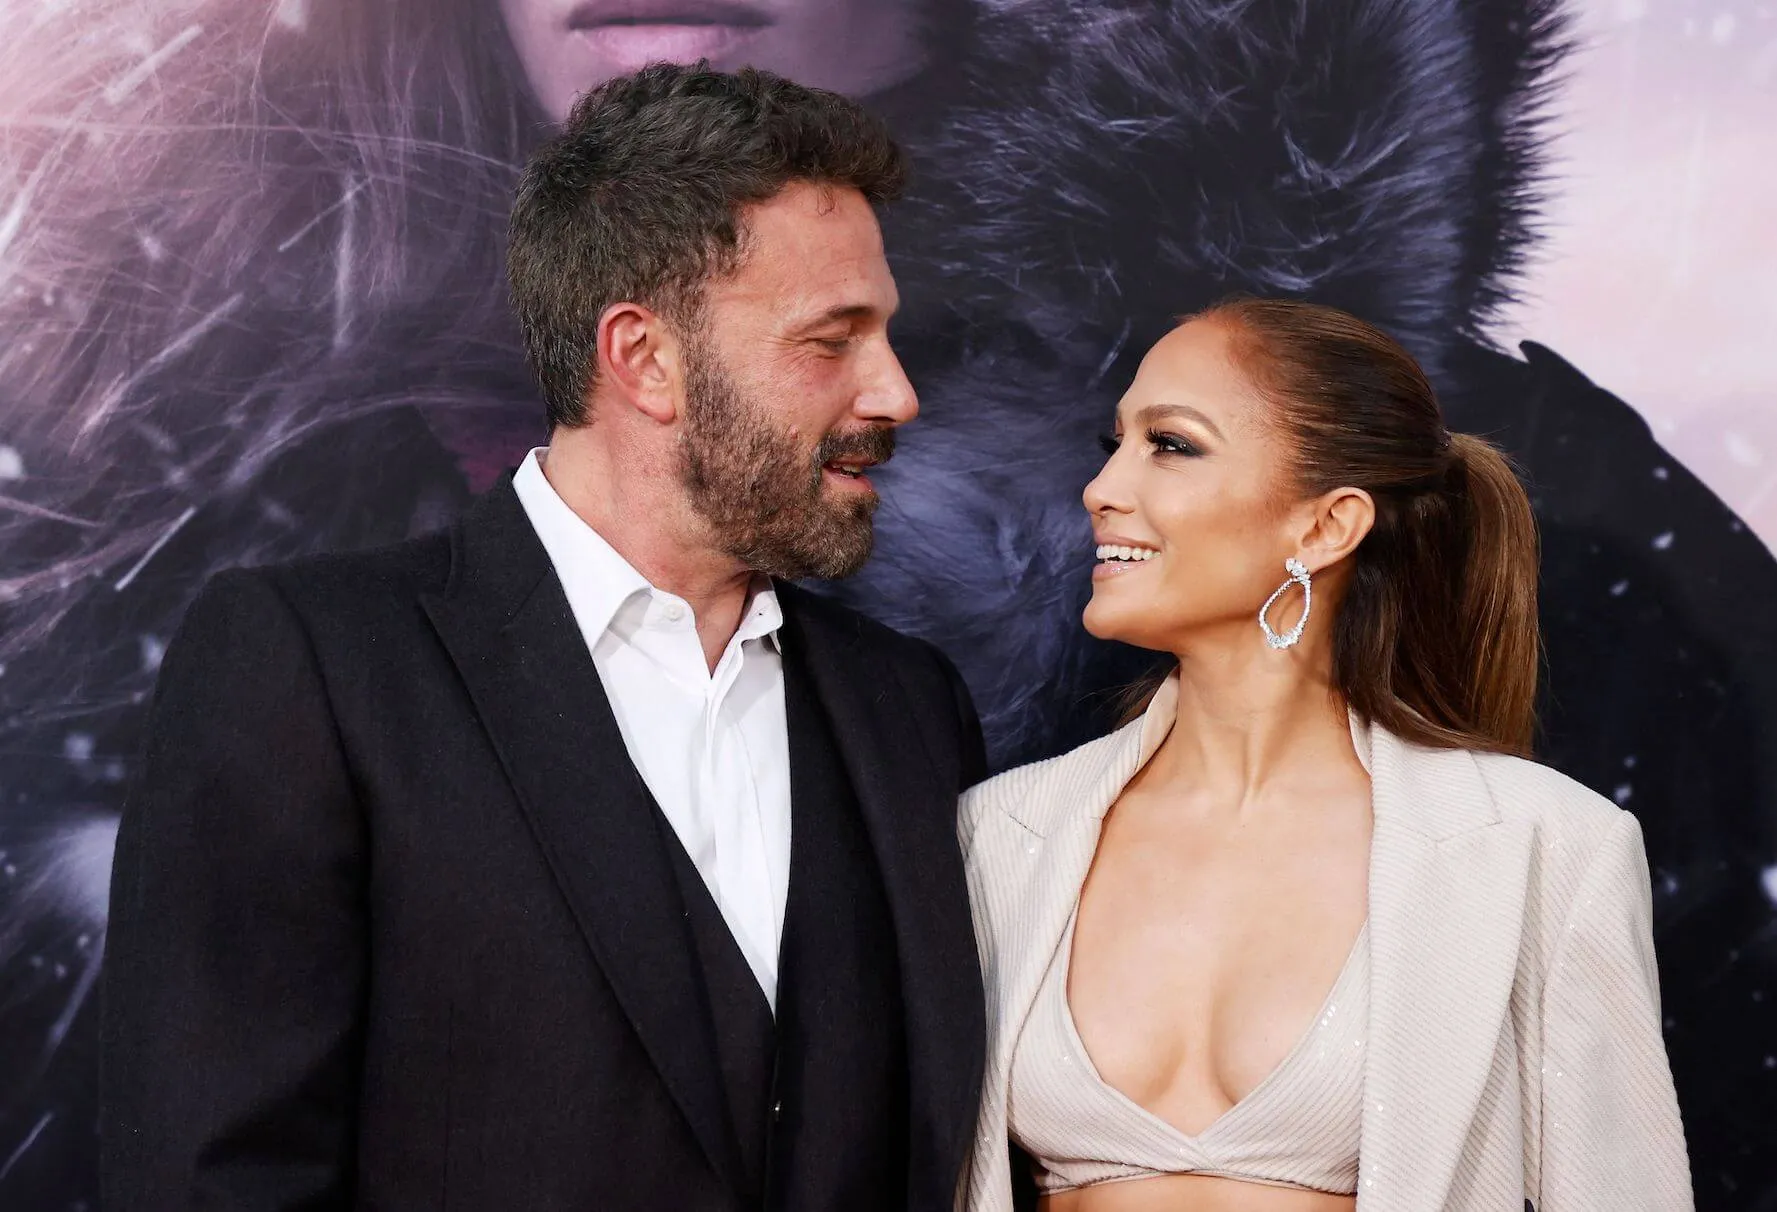 Ben Affleck and Jennifer Lopez looking at each other at a movie premiere in 2023